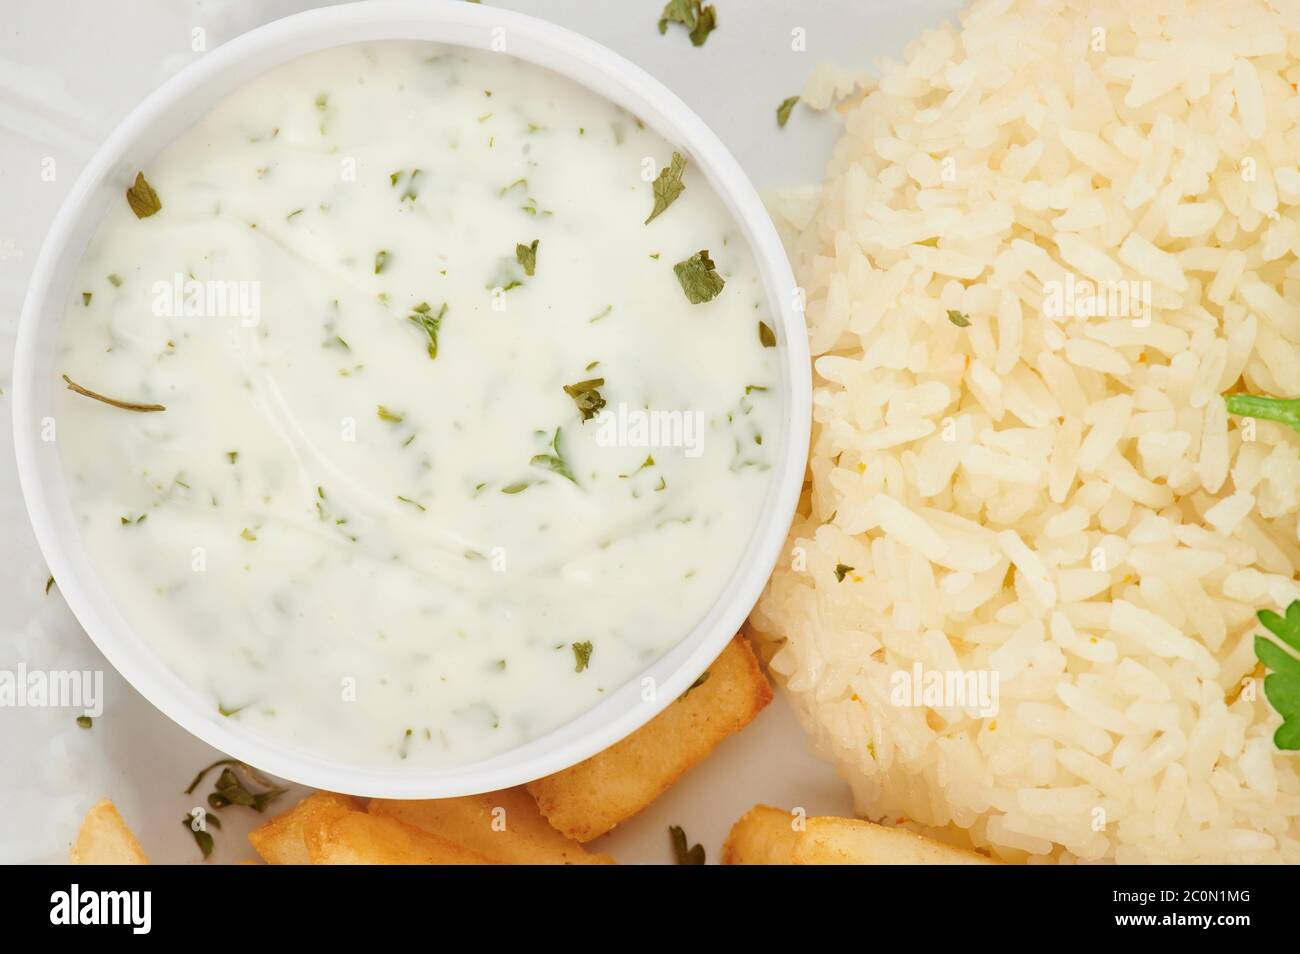 Tartar sauce with rice and french fries close up view Stock Photo